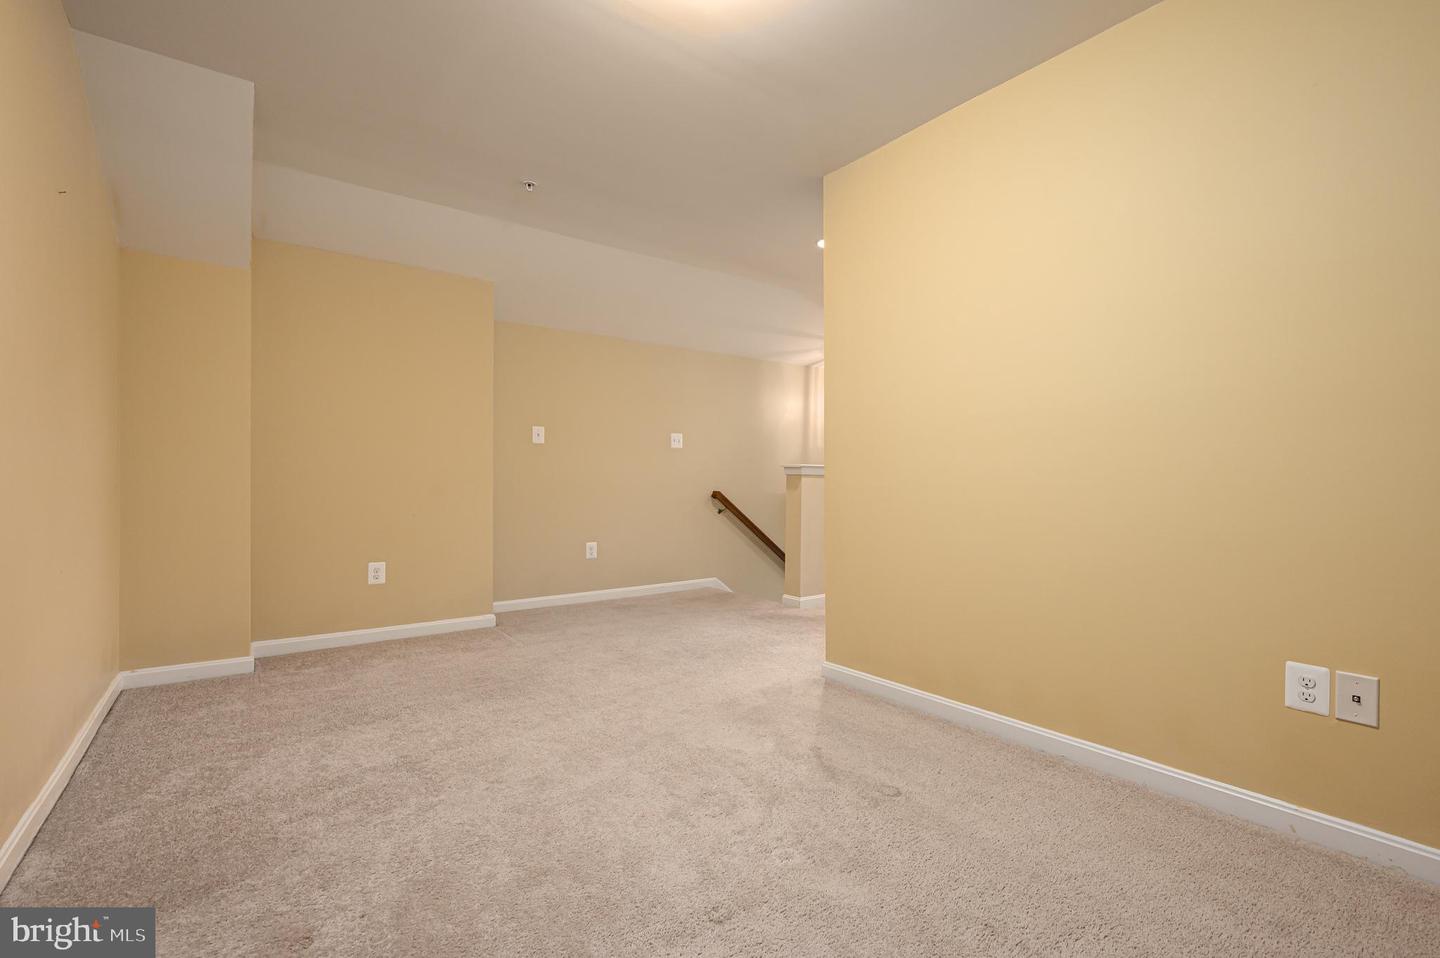 Photo 22 of 28 of 8013 Jean Ct #J-1 townhome